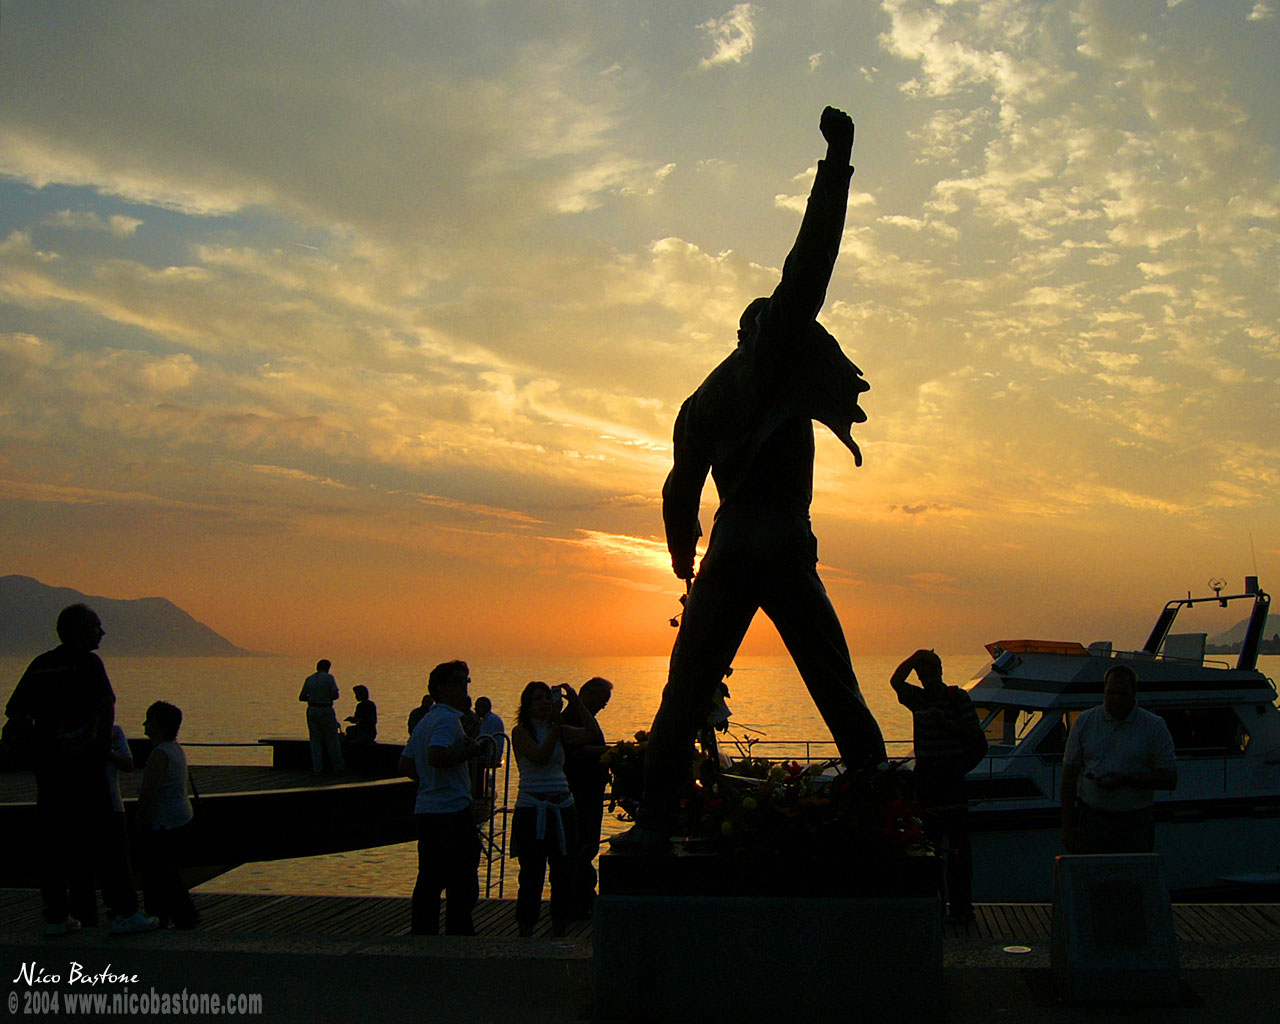 Montreux Freddie Mercury statue Wallpaper 1280 x 1024 - Copyright by Nico Bastone. All Rights Reserved